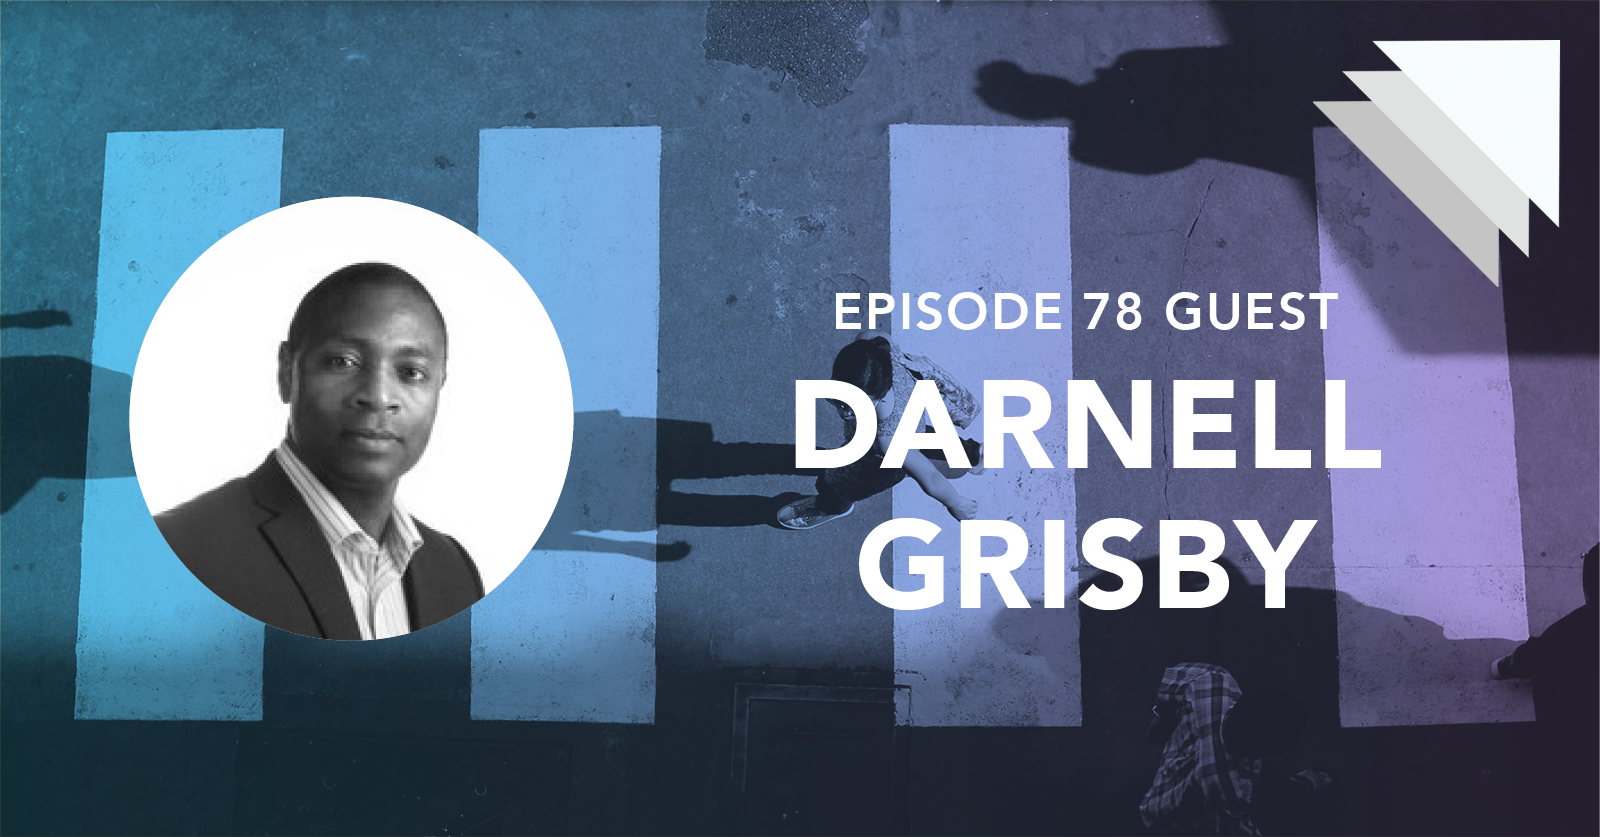 Episode 78 guest Darnell Grisby